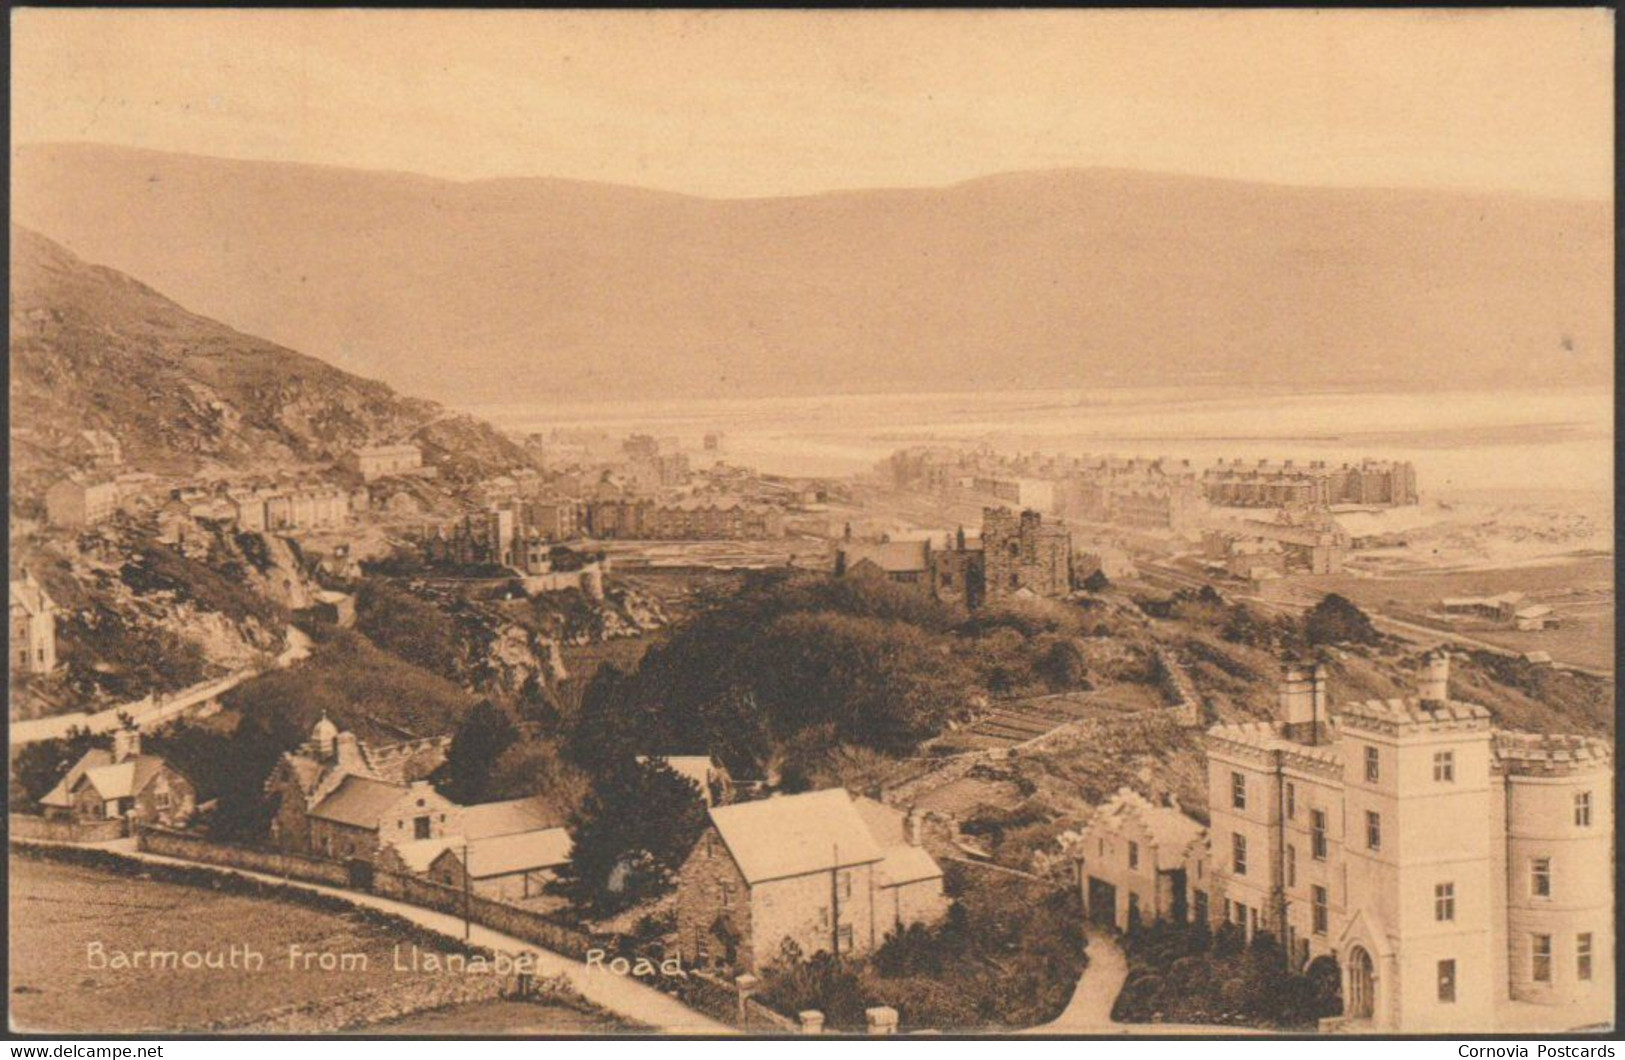 Barmouth From Llanaber Road, Merionethshire, 1911 - Postcard - Merionethshire